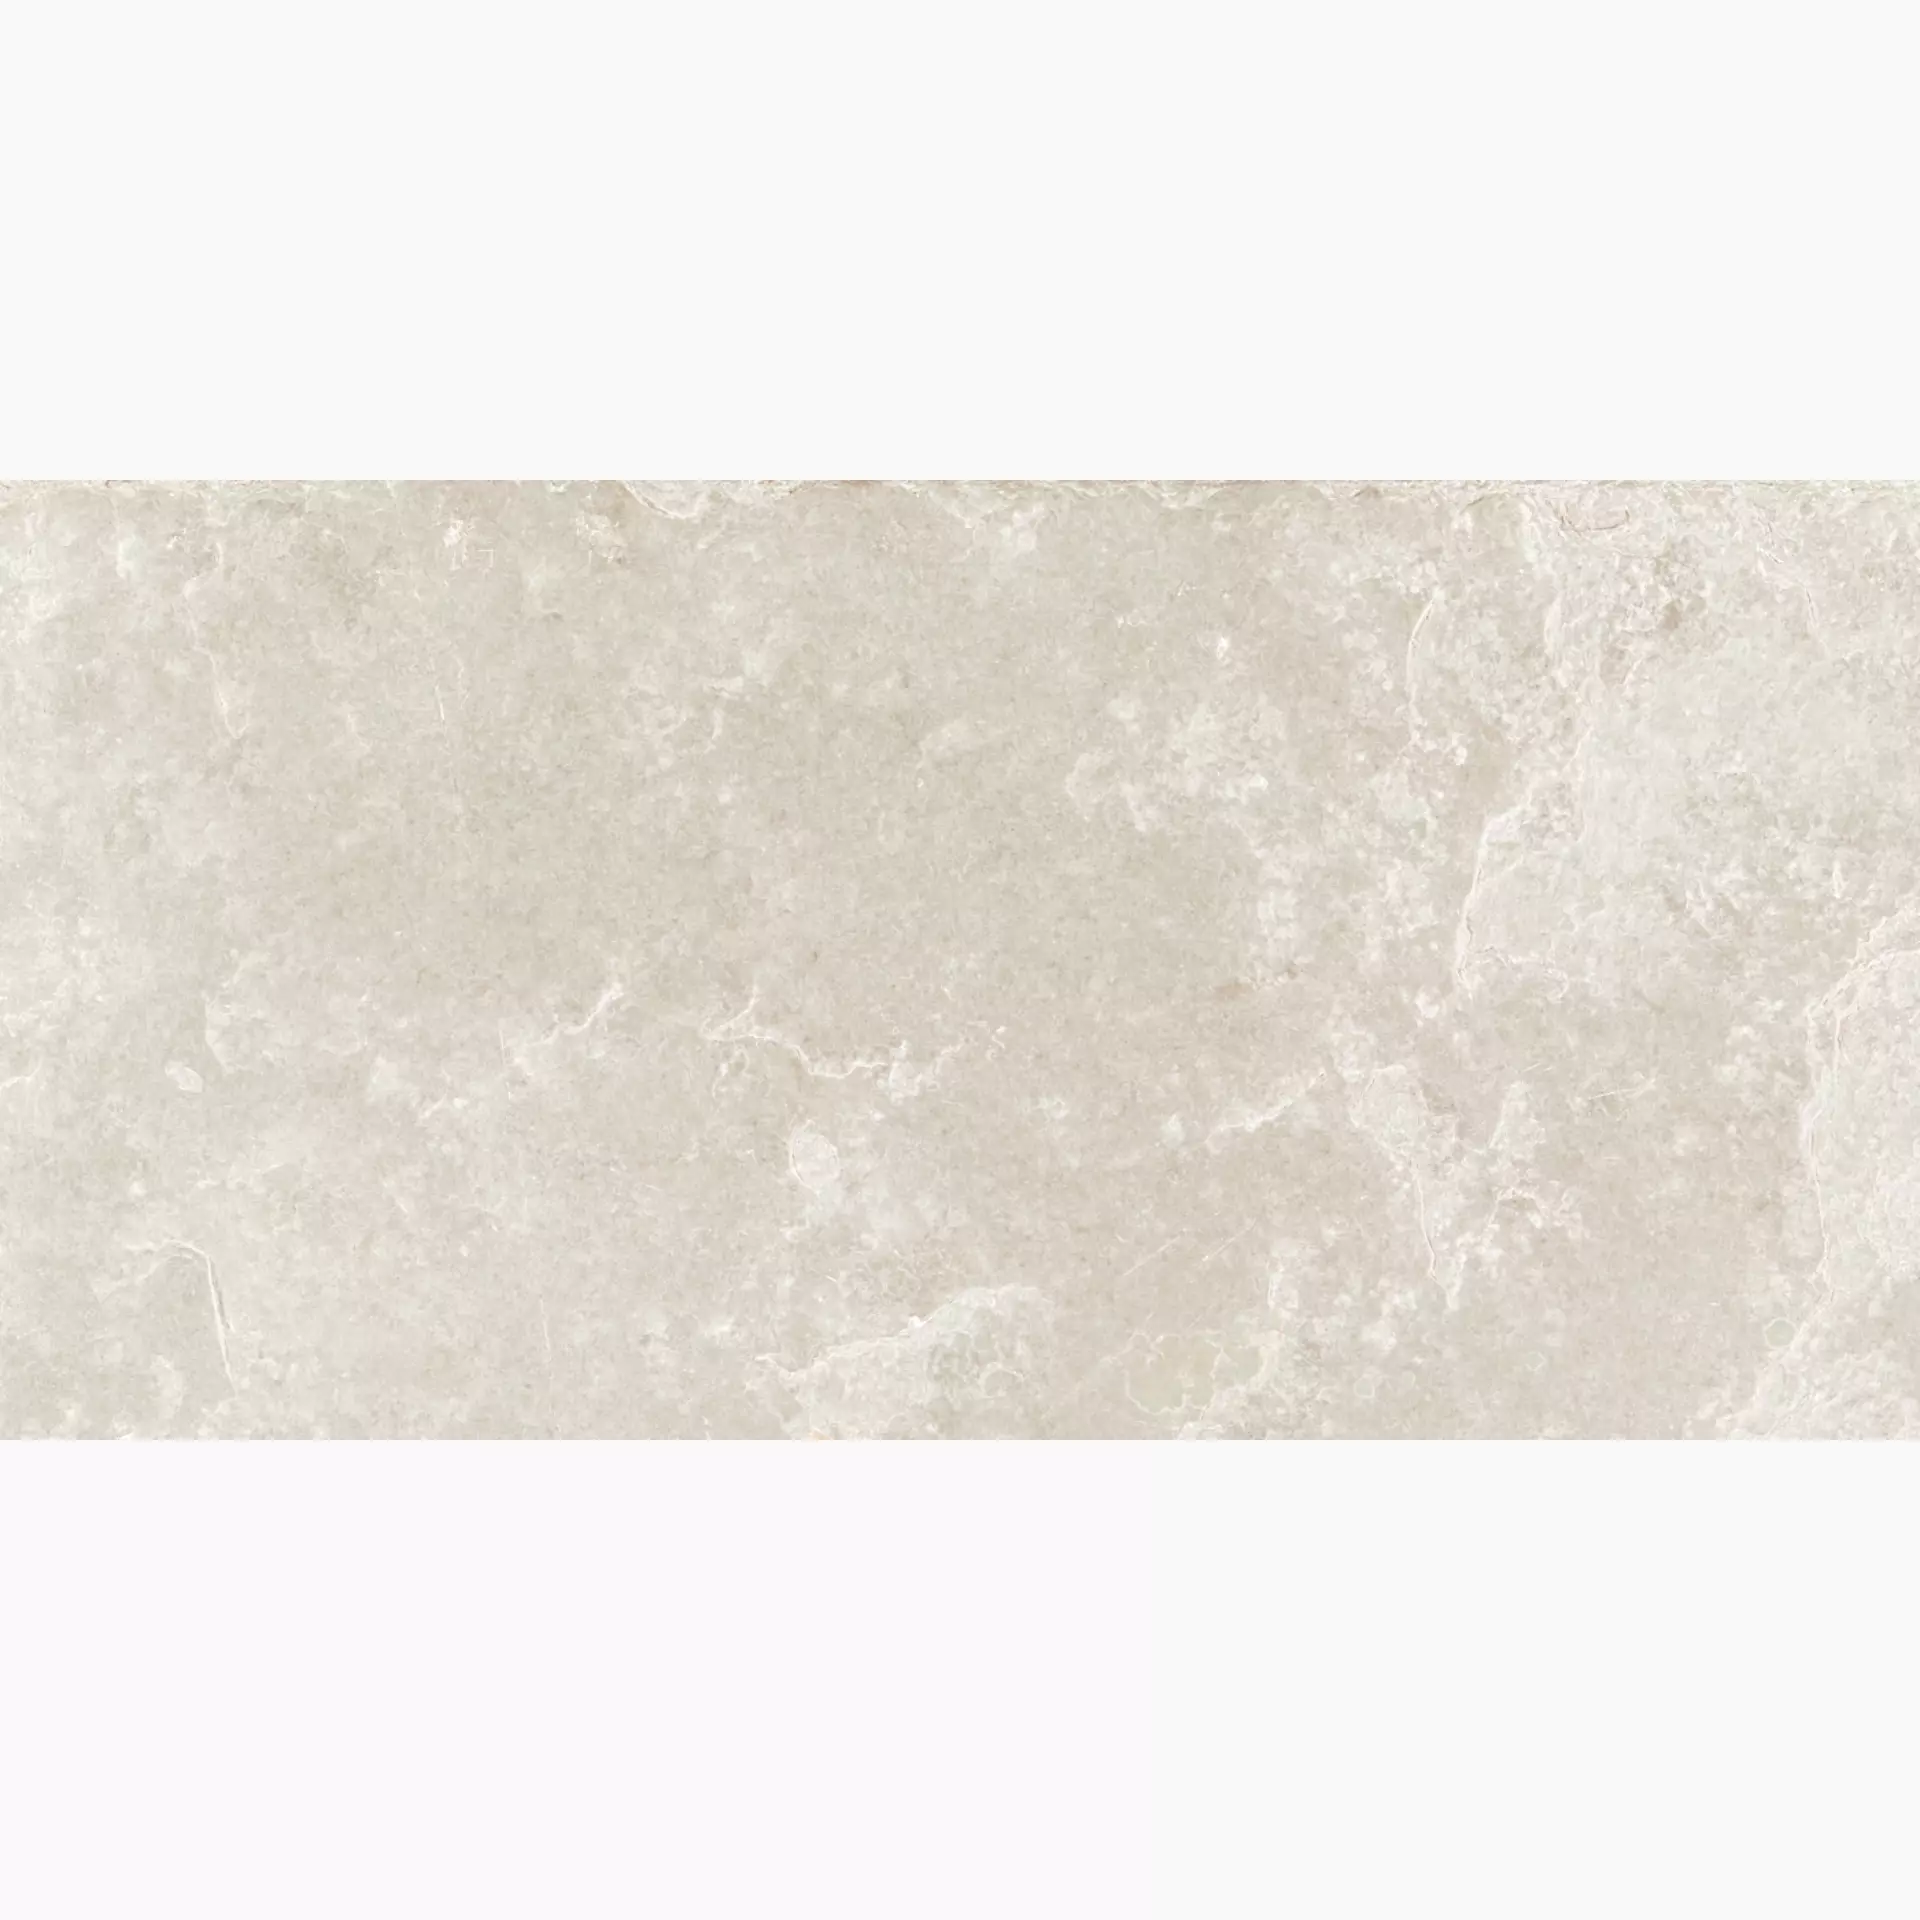 Provenza Groove Hot White Naturale E360 30x60cm rectified 9,5mm